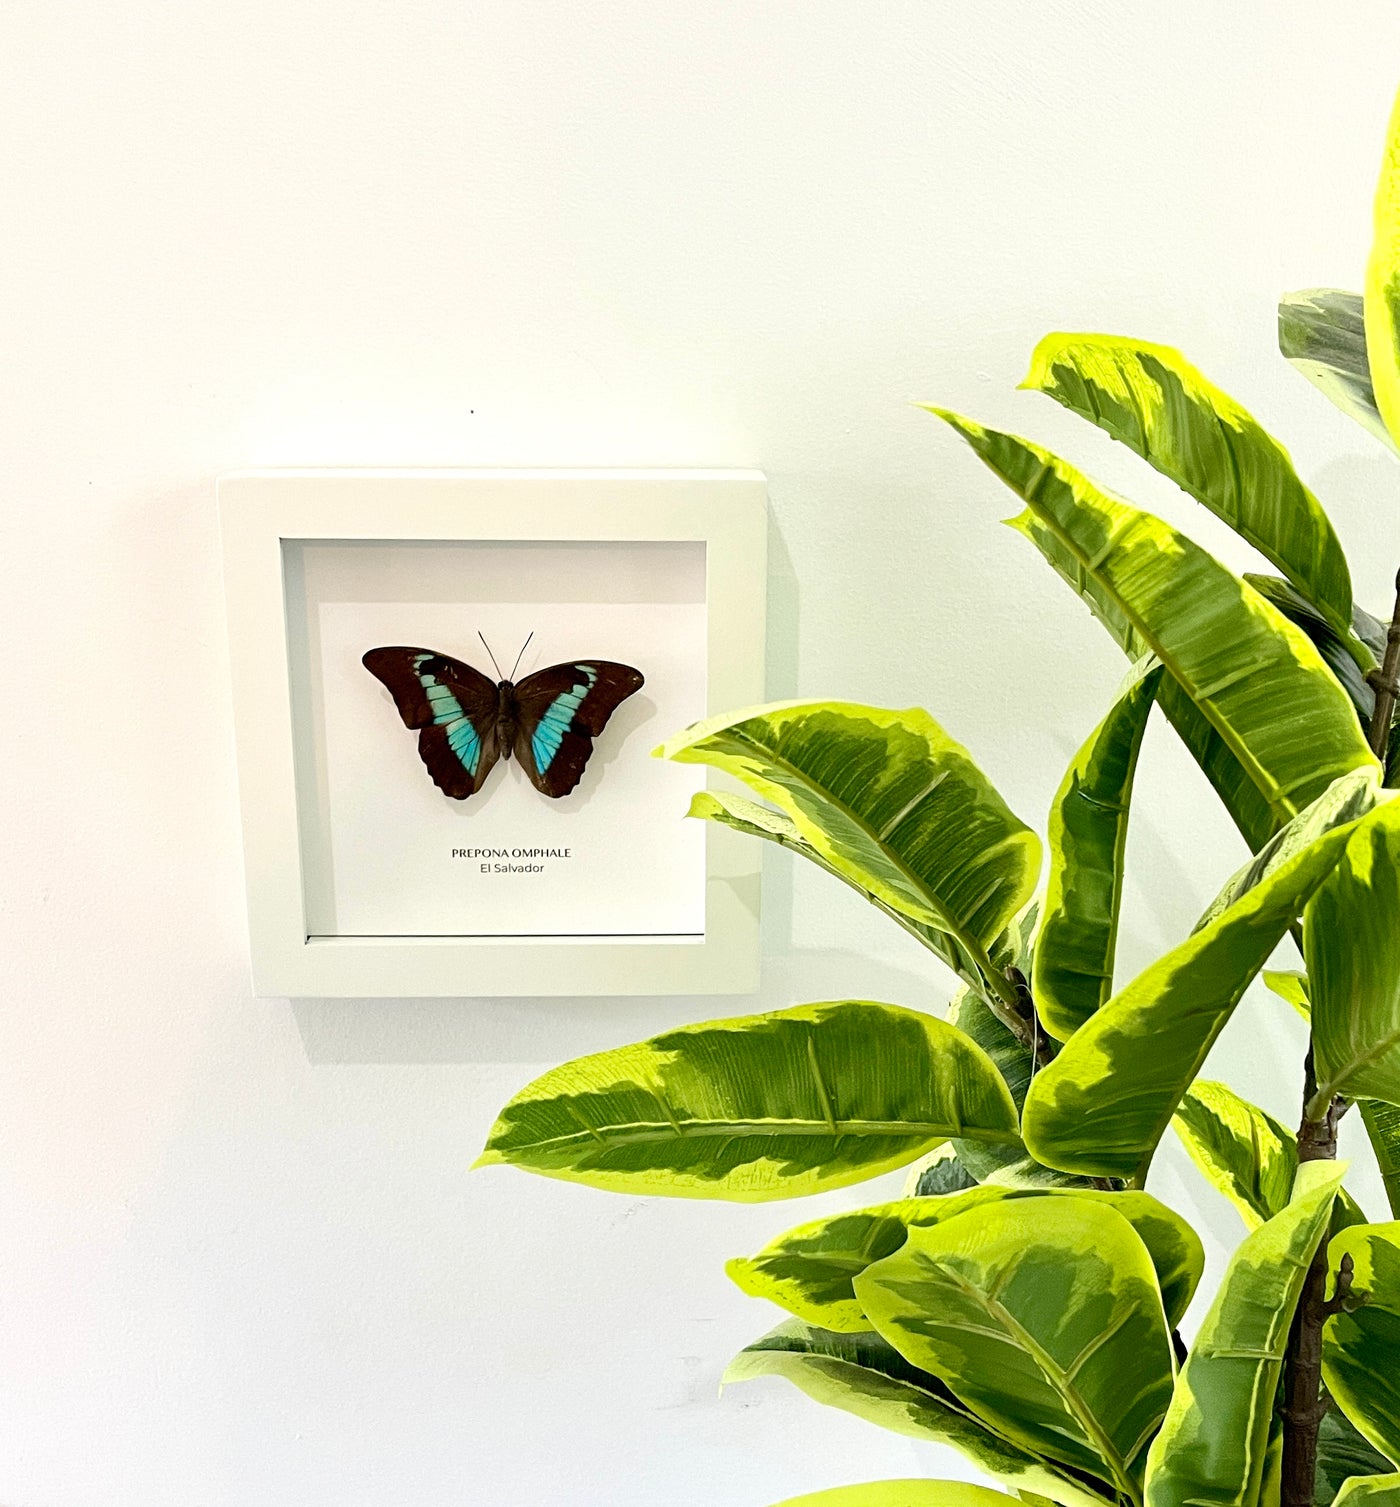 Real Prepona Omphale Butterfly preserved behind glass